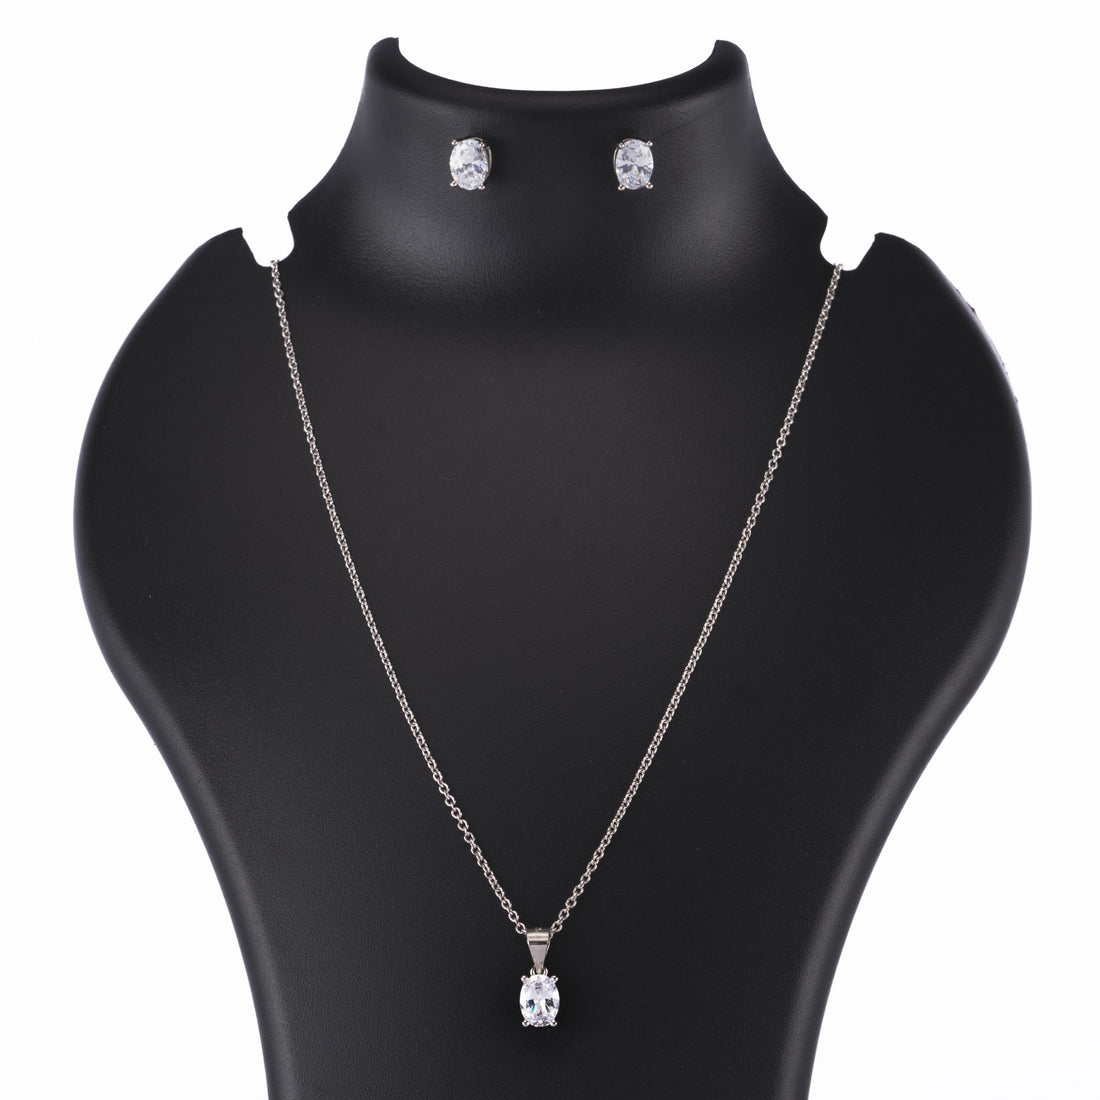 Silver Set Chain Pendant and Earrings with Finely Cut Stones for Women